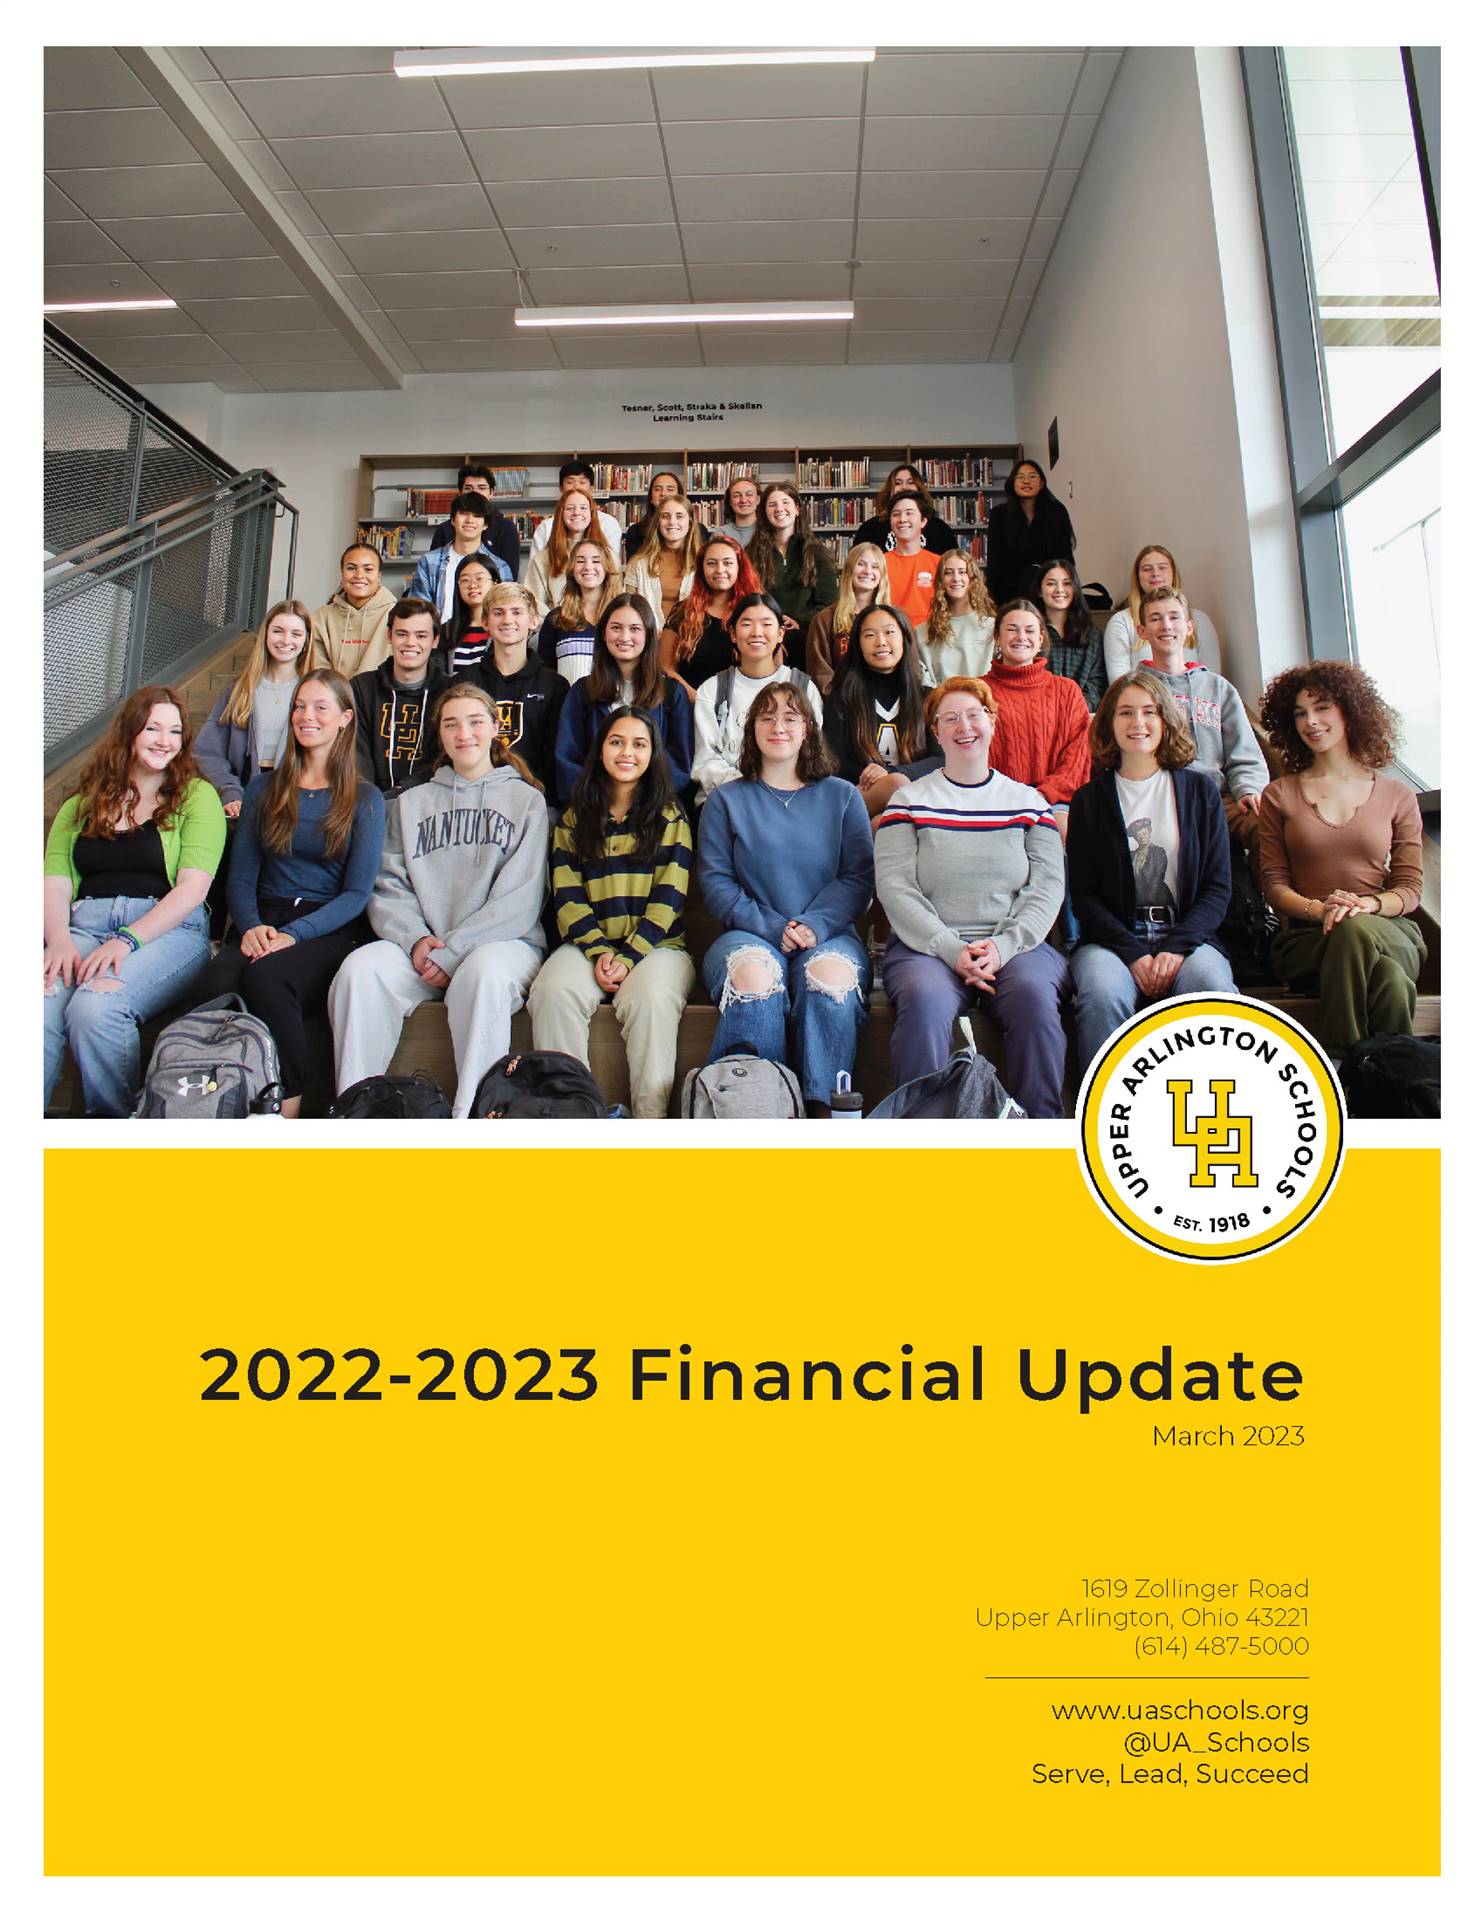 The cover of the 2022-2023 Financial Update